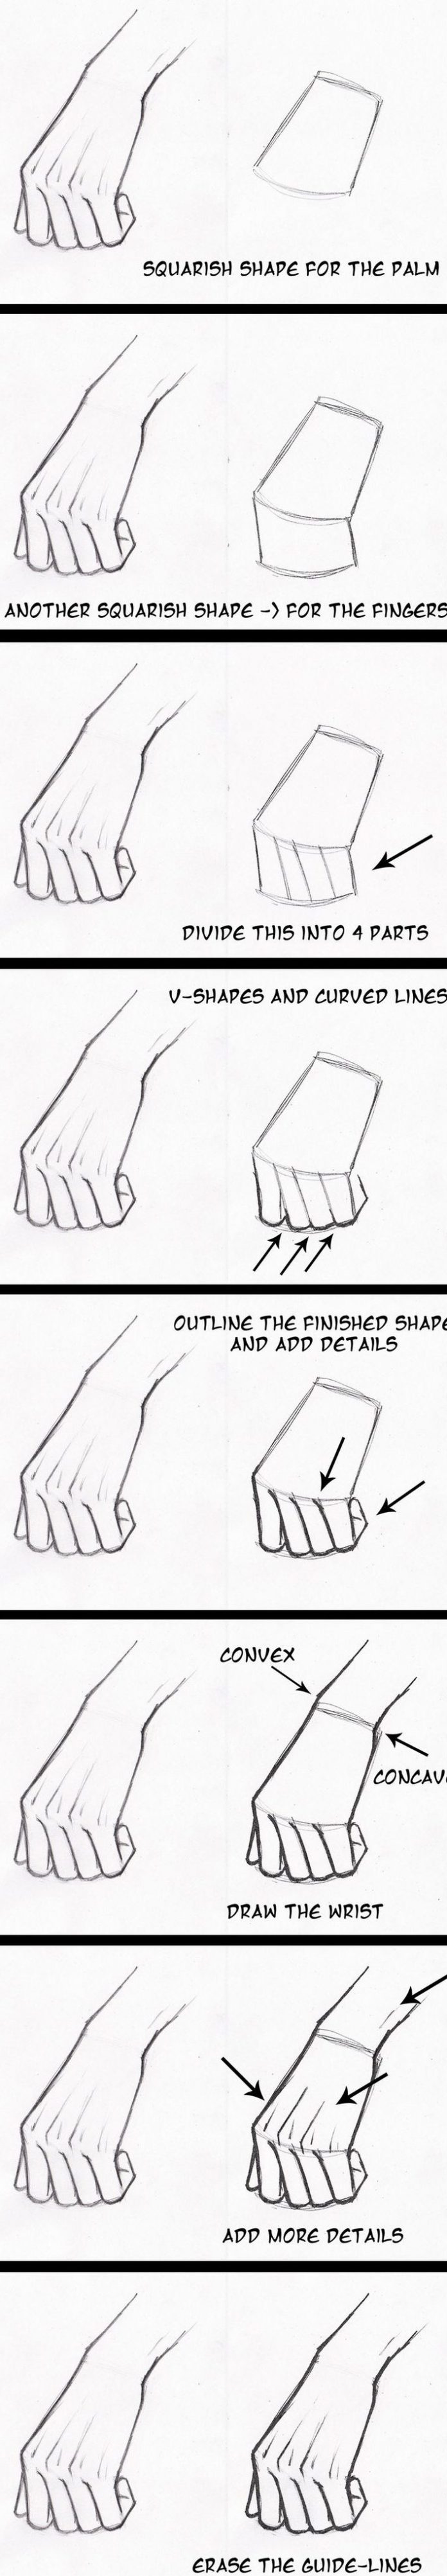 20 Easy Drawing Tutorials for Beginners – Cool Things to Draw Step By